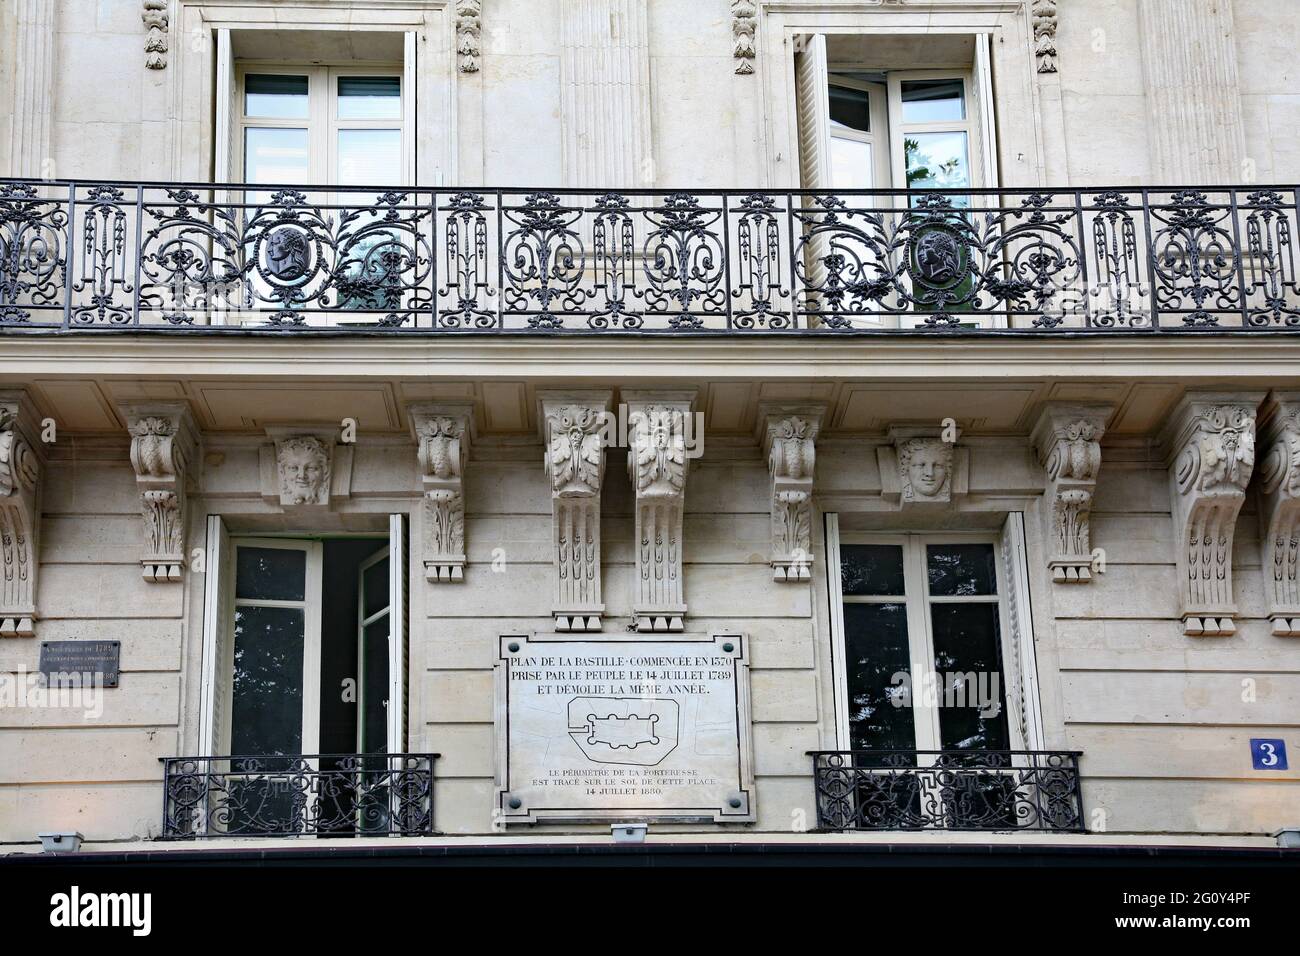 Paris, France - July 7, 2010:  Apartment building overlooking the former site of the Bastille prison fortress, with a plaque showing its outline. Stock Photo